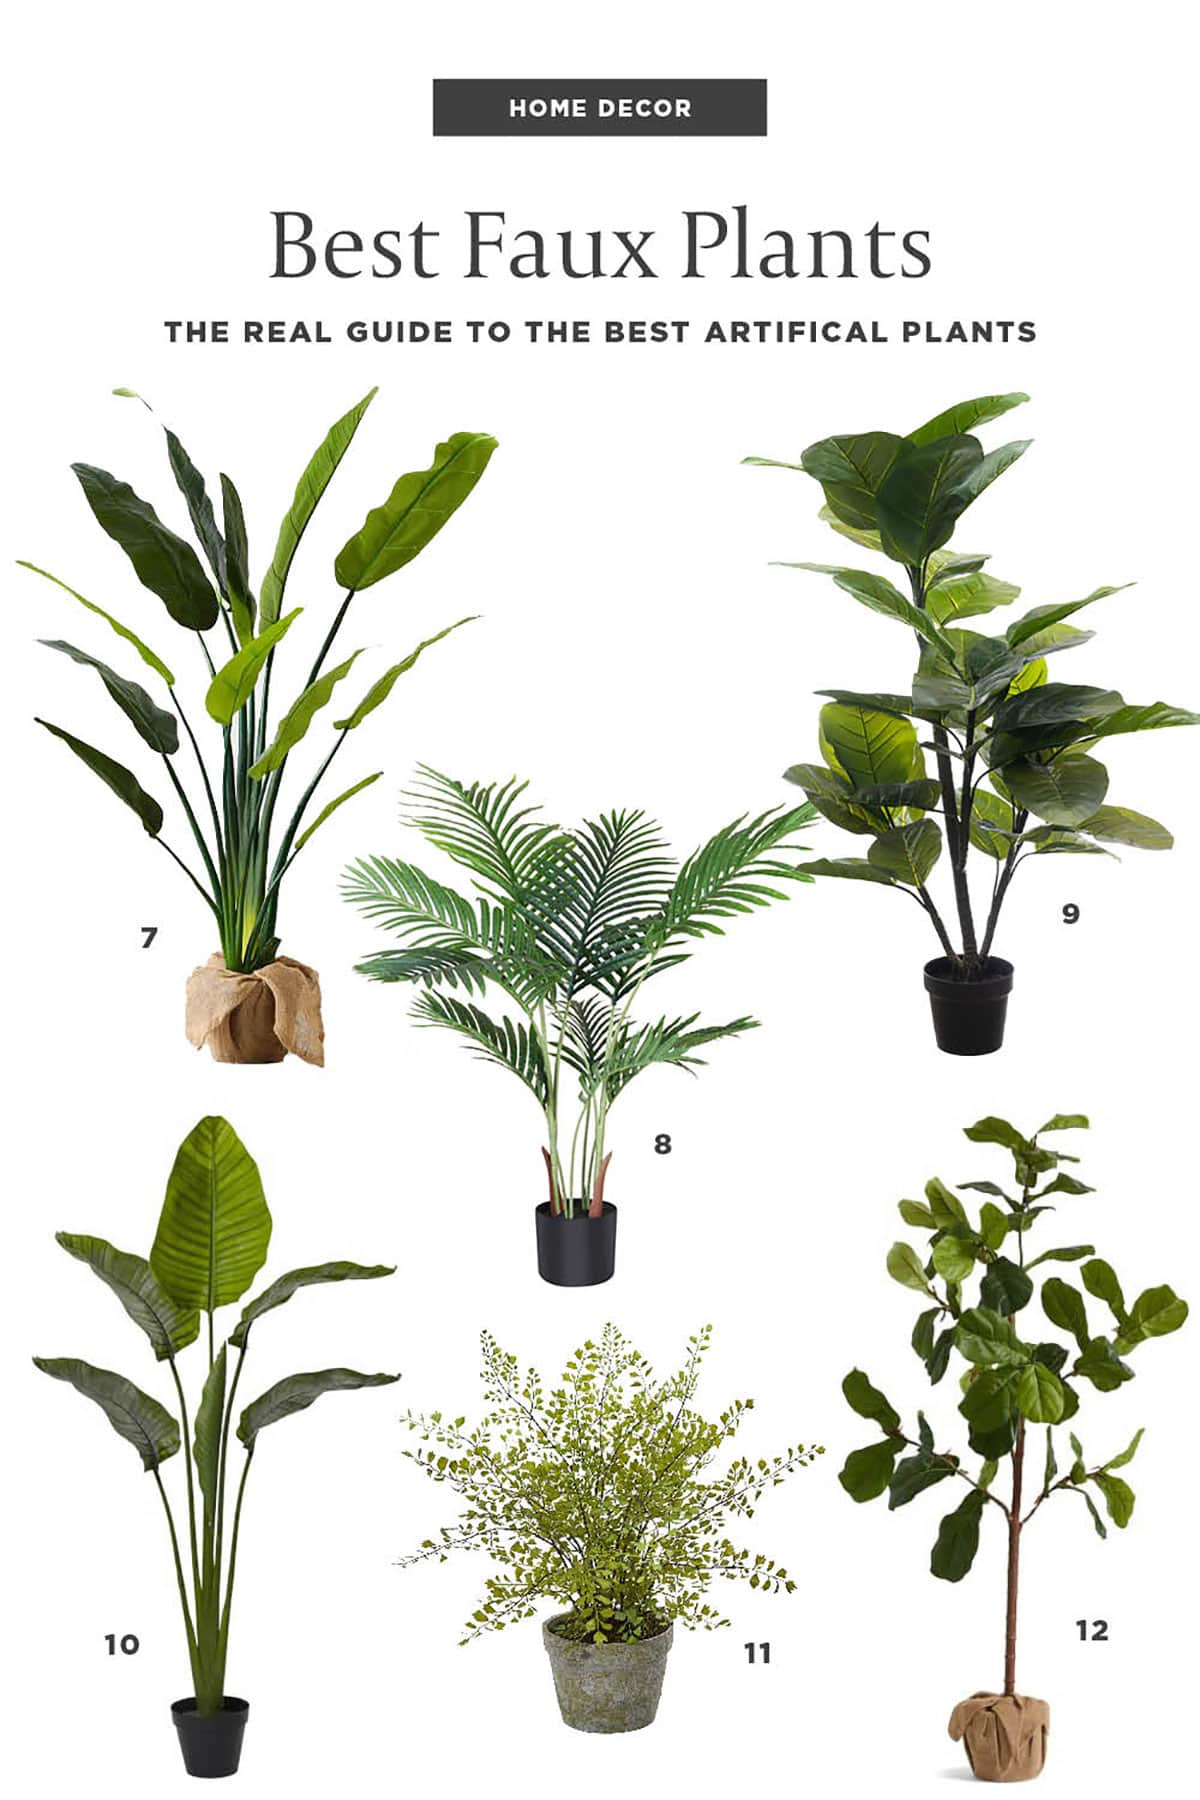 Guide to the best faux plants that look real - Fake plants are no longer a faux pas. Elevate your home decor with these 23 artificial plants that look so real you'll fool an interior designer! - potted faux plant and artificial trees